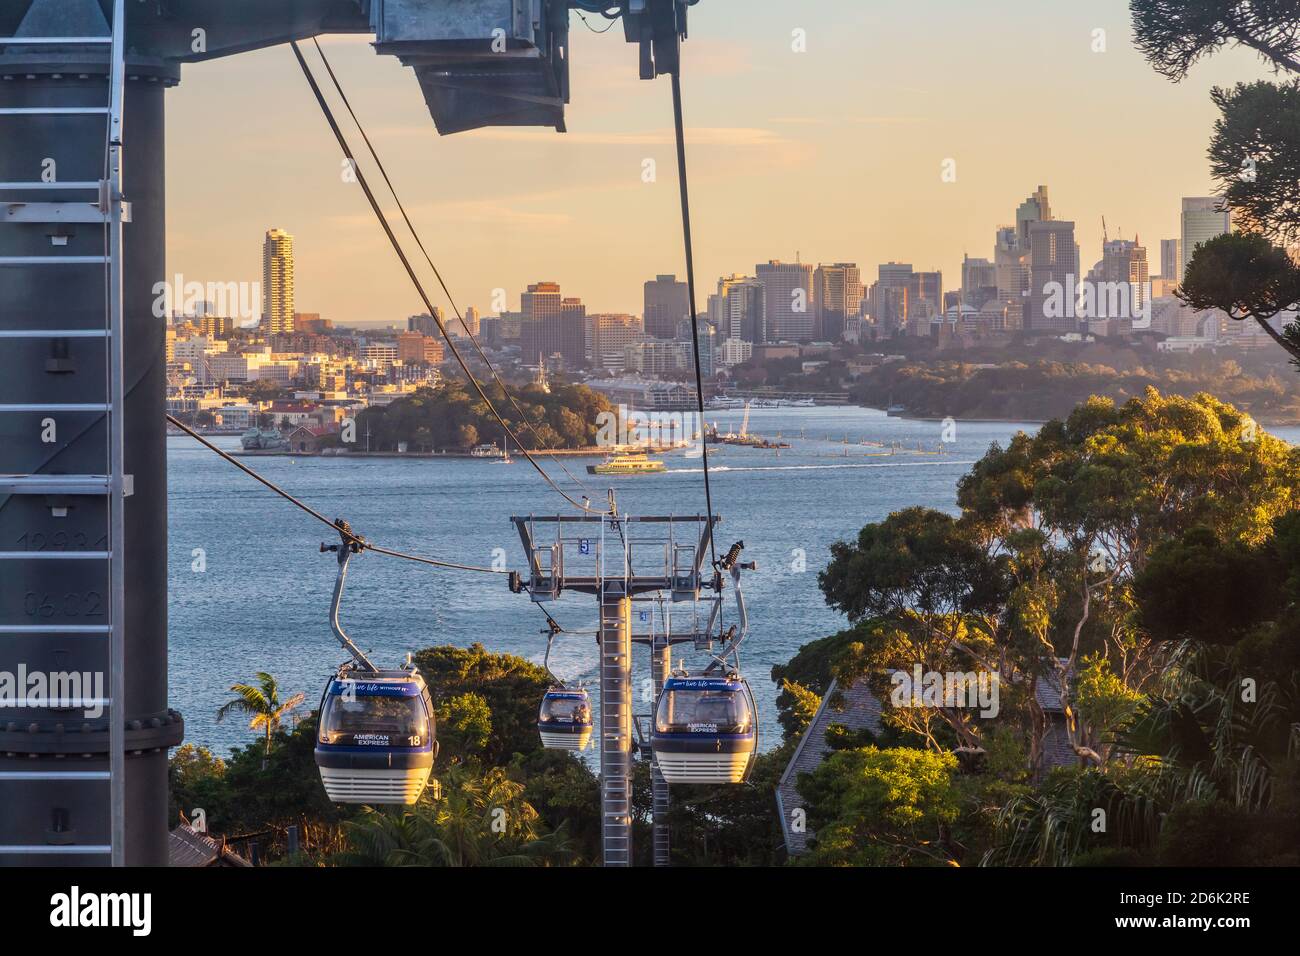 Cable cars at Taronga Zoo, Sydney, Australia. In the background, the city skyline is bathed in warm sunset light Stock Photo